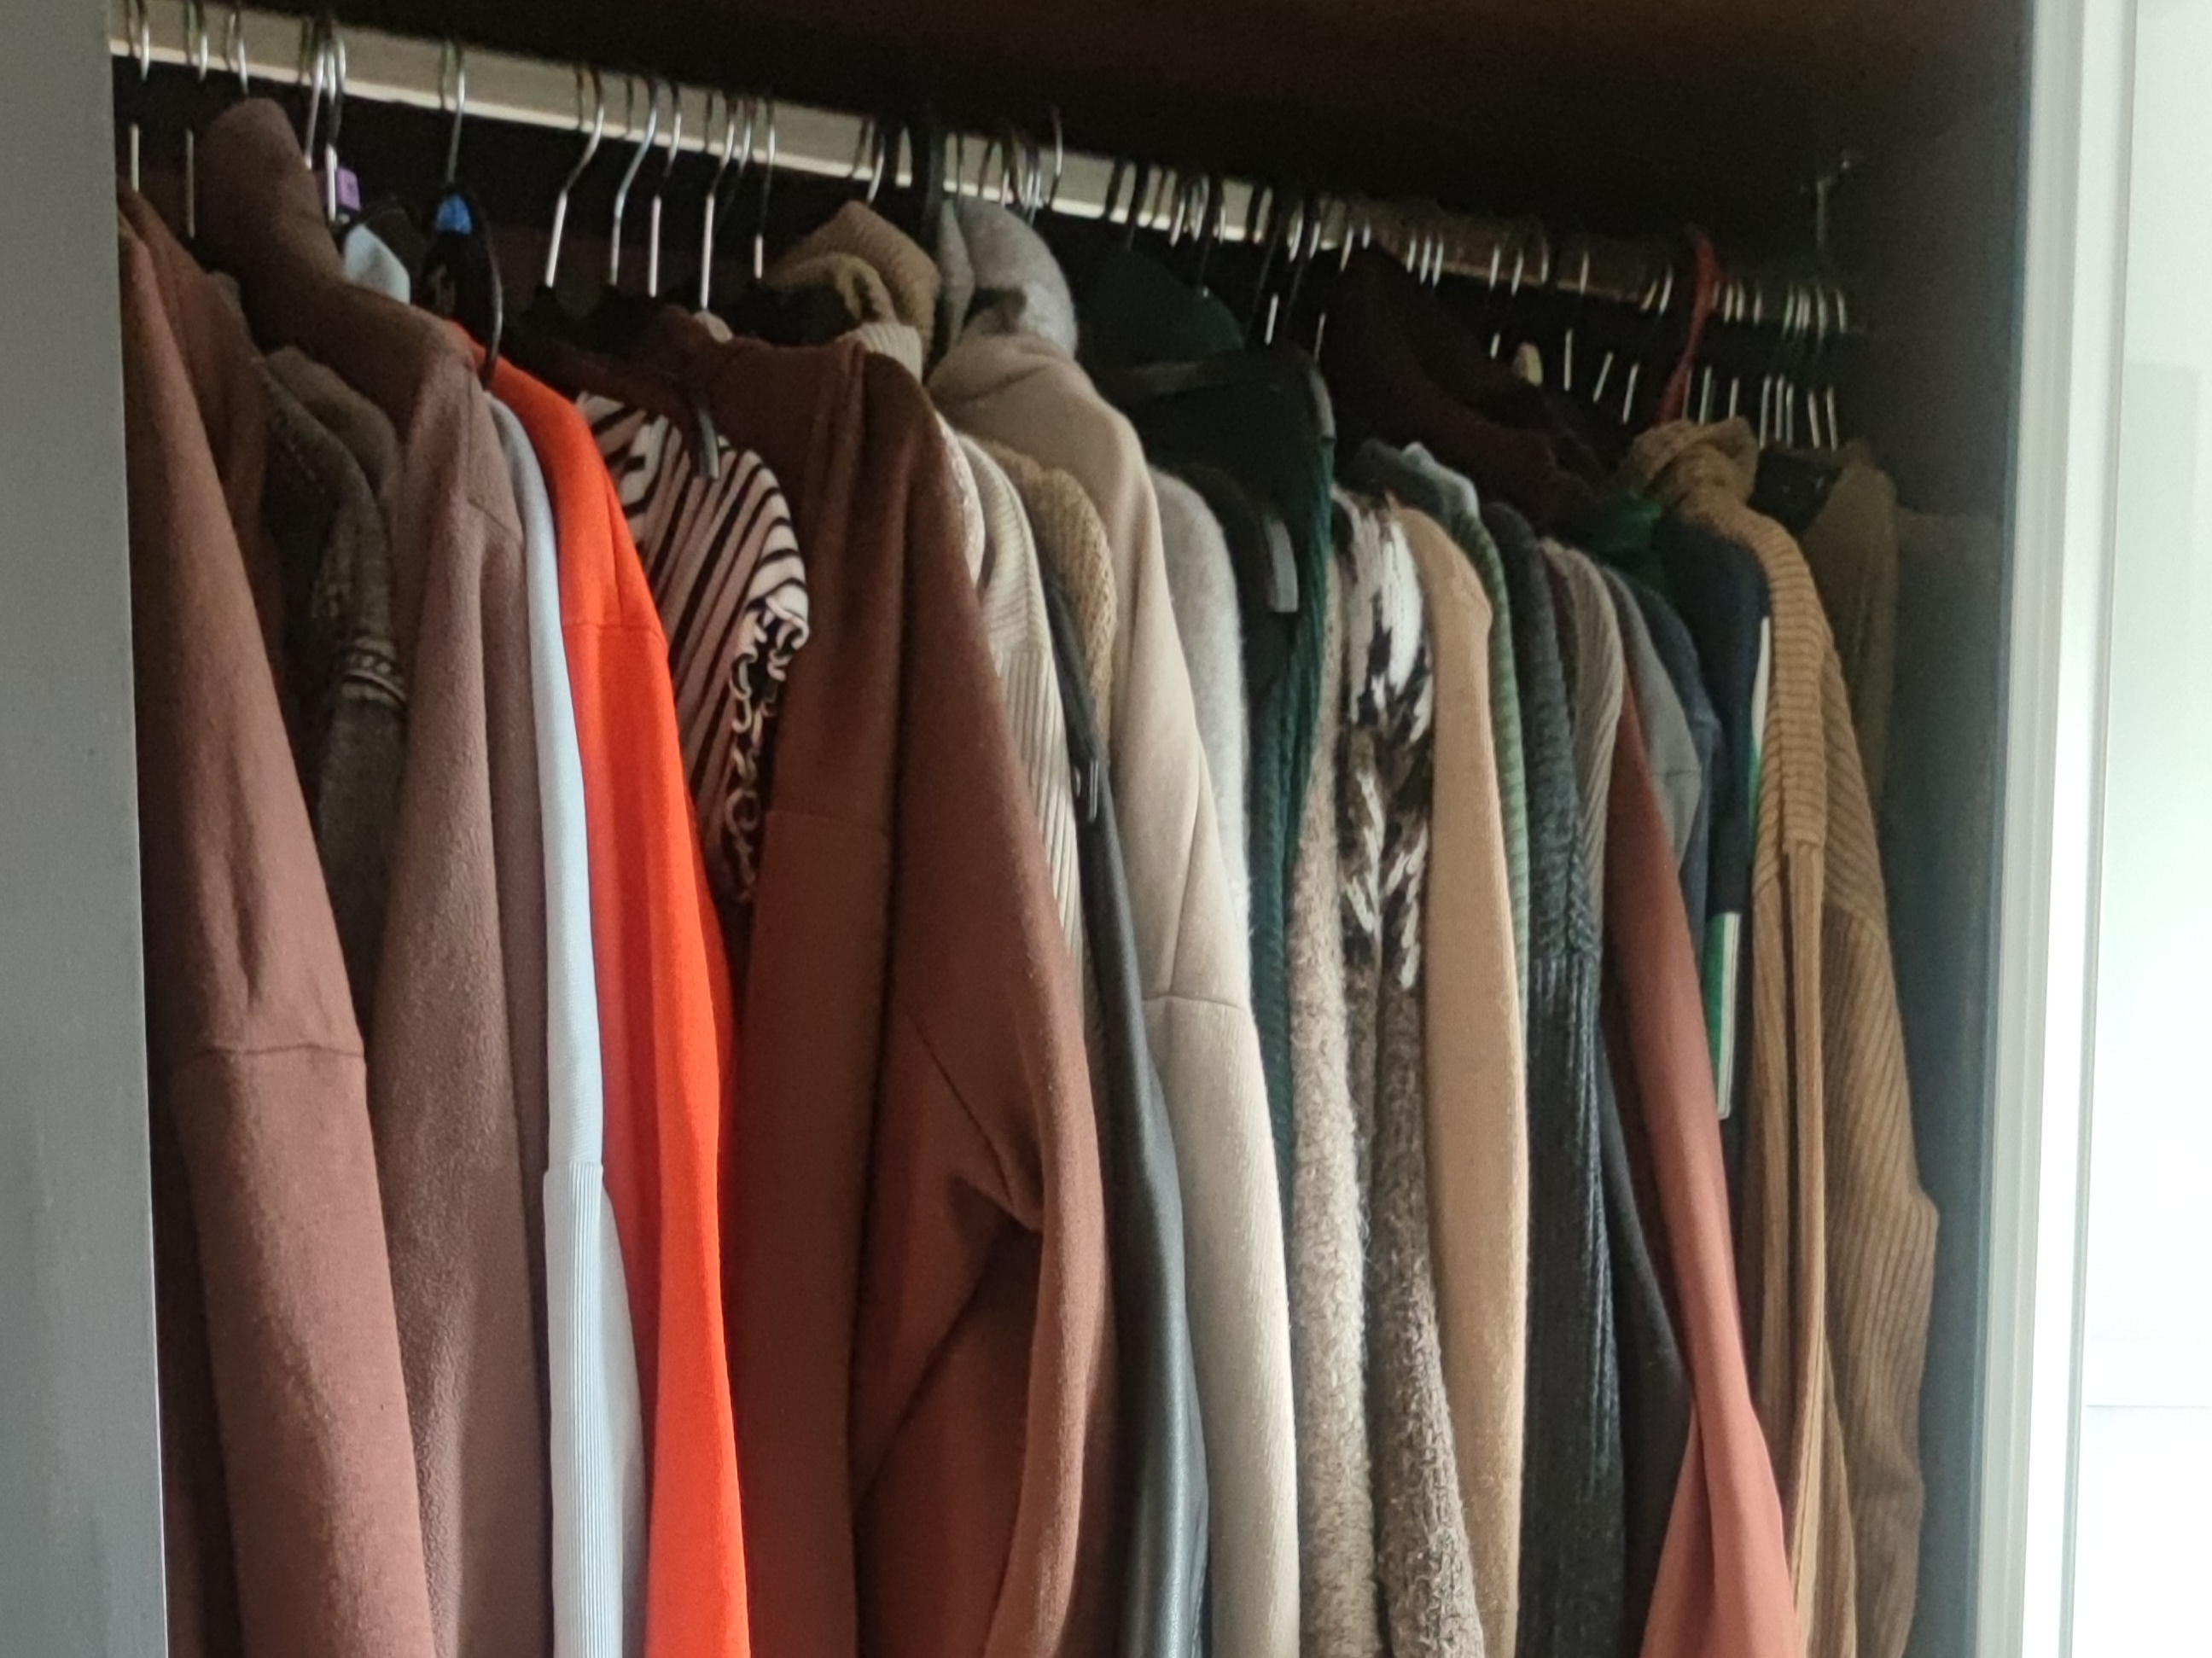 An image of an open wardrobe with a hanging rail full of different items of clothing.